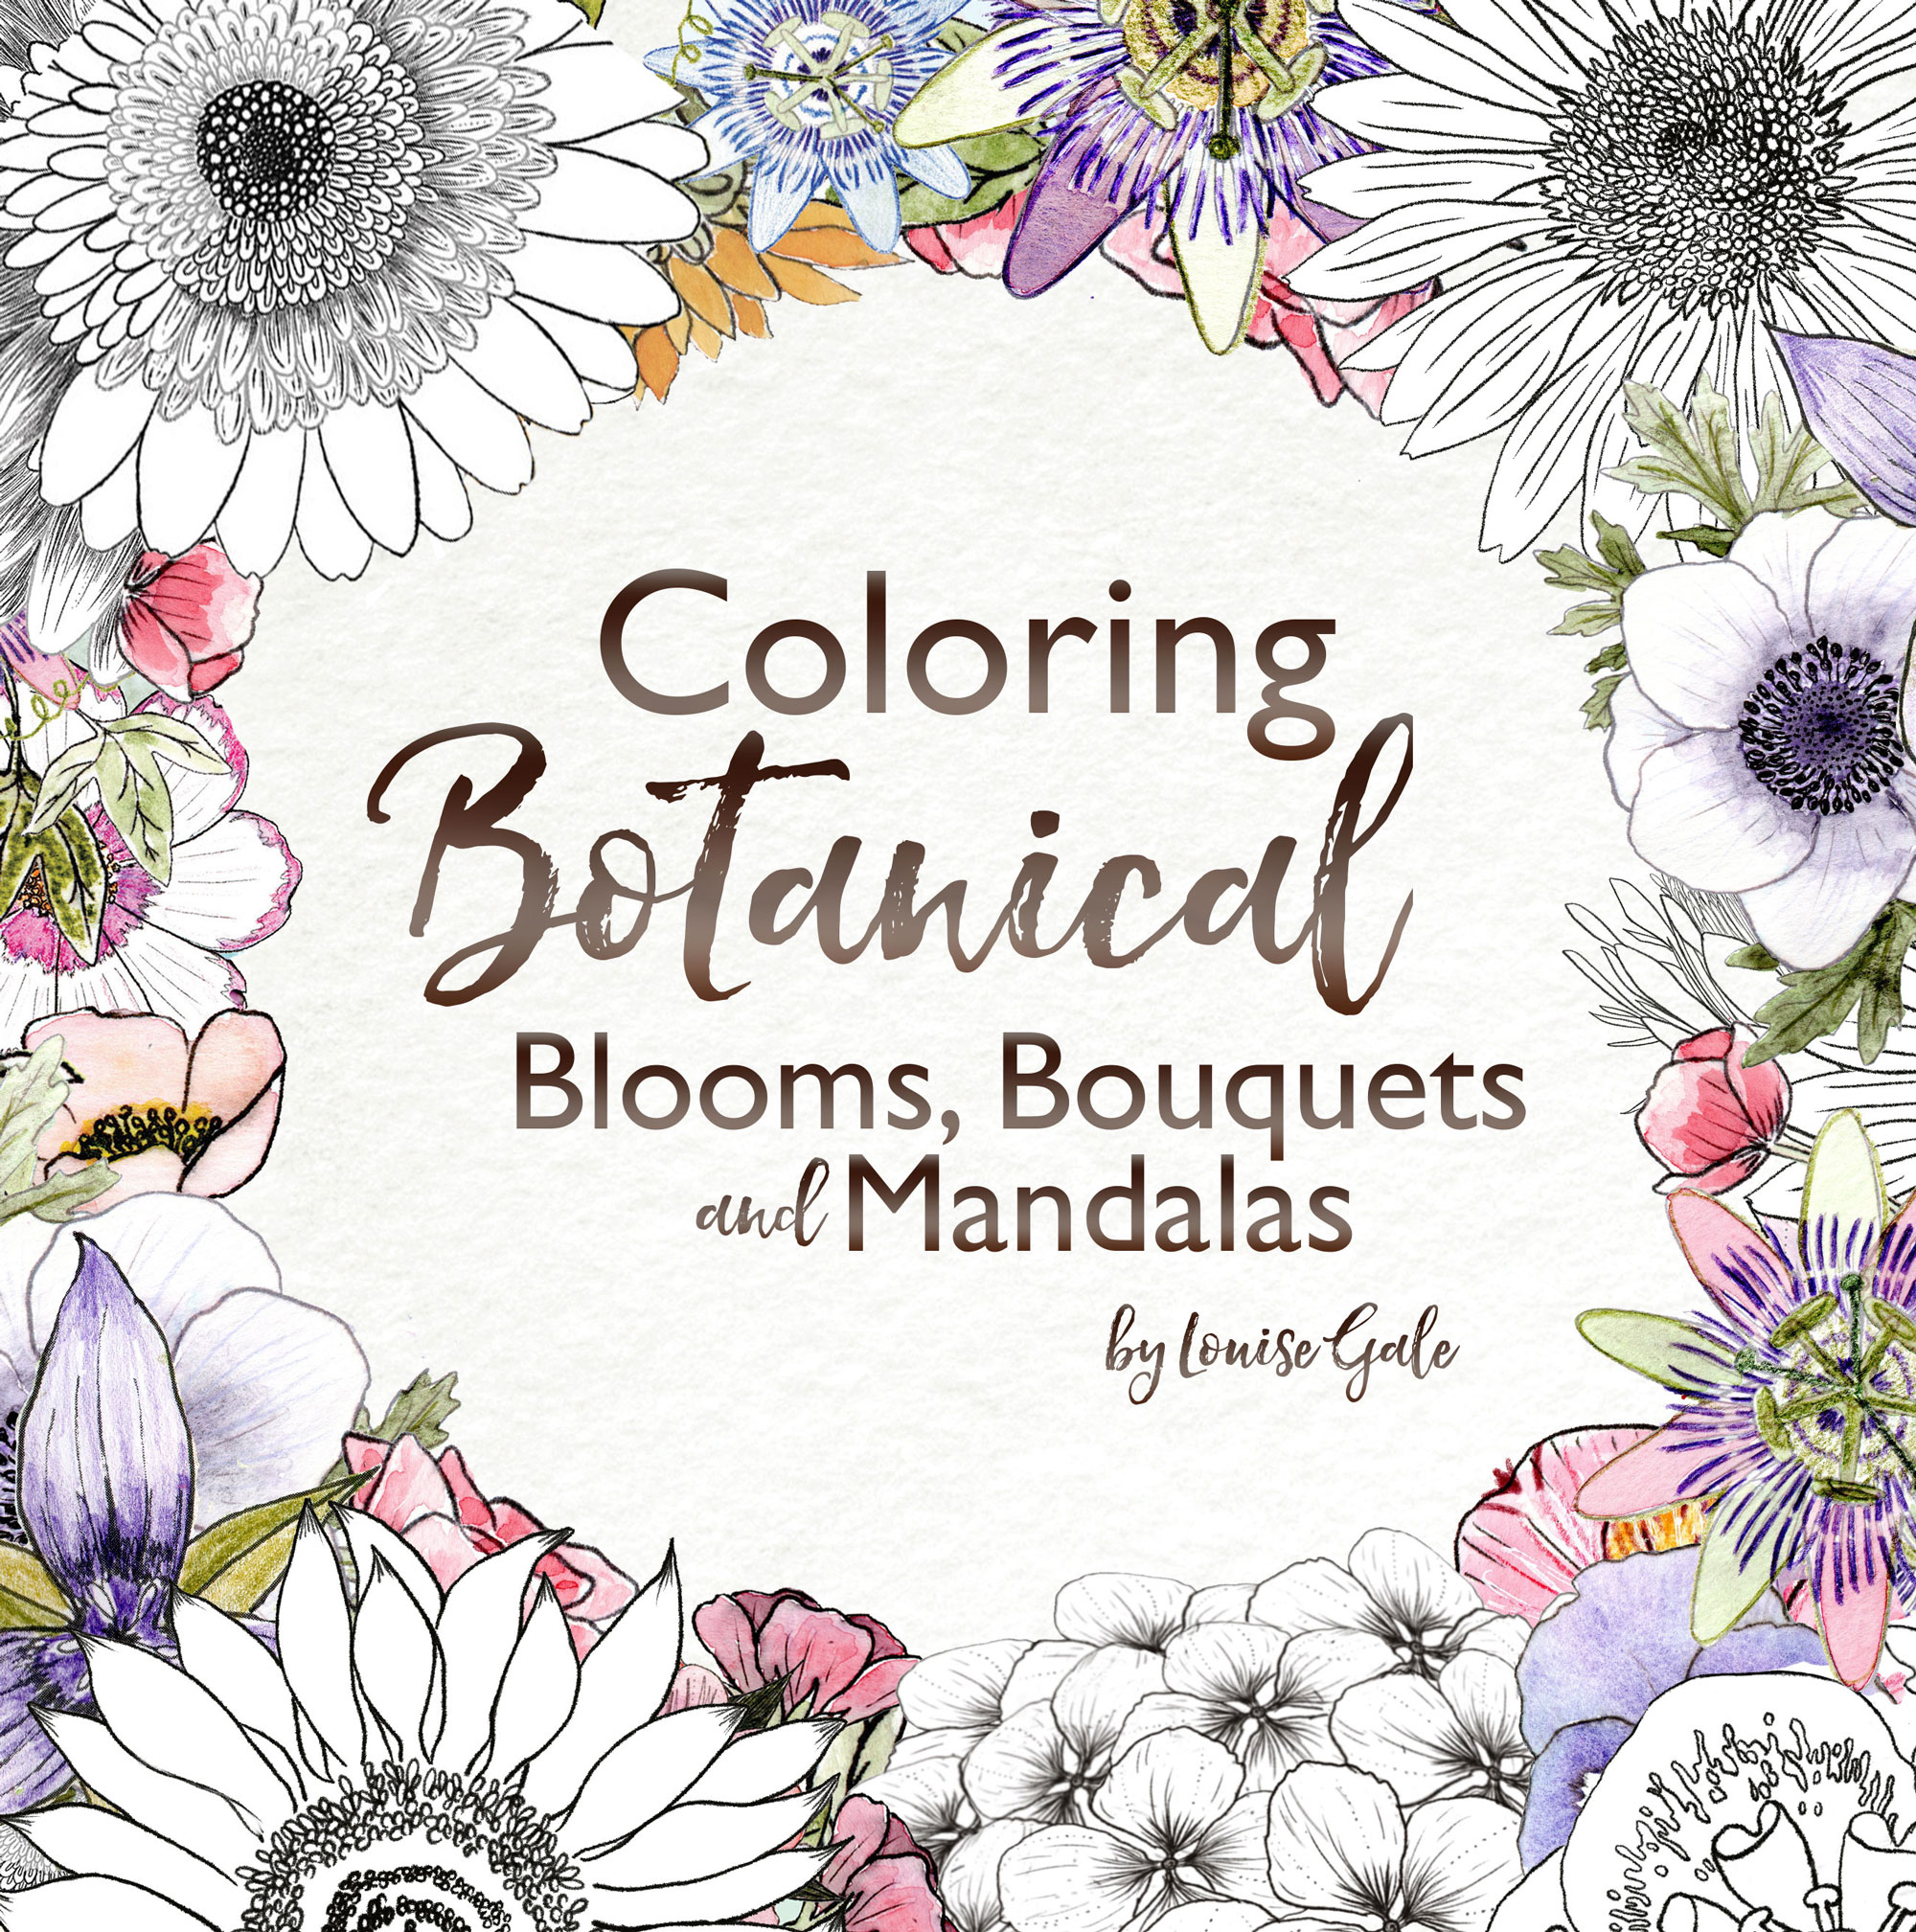 Coloring Botanical Blooms, Bouquets and Mandalas